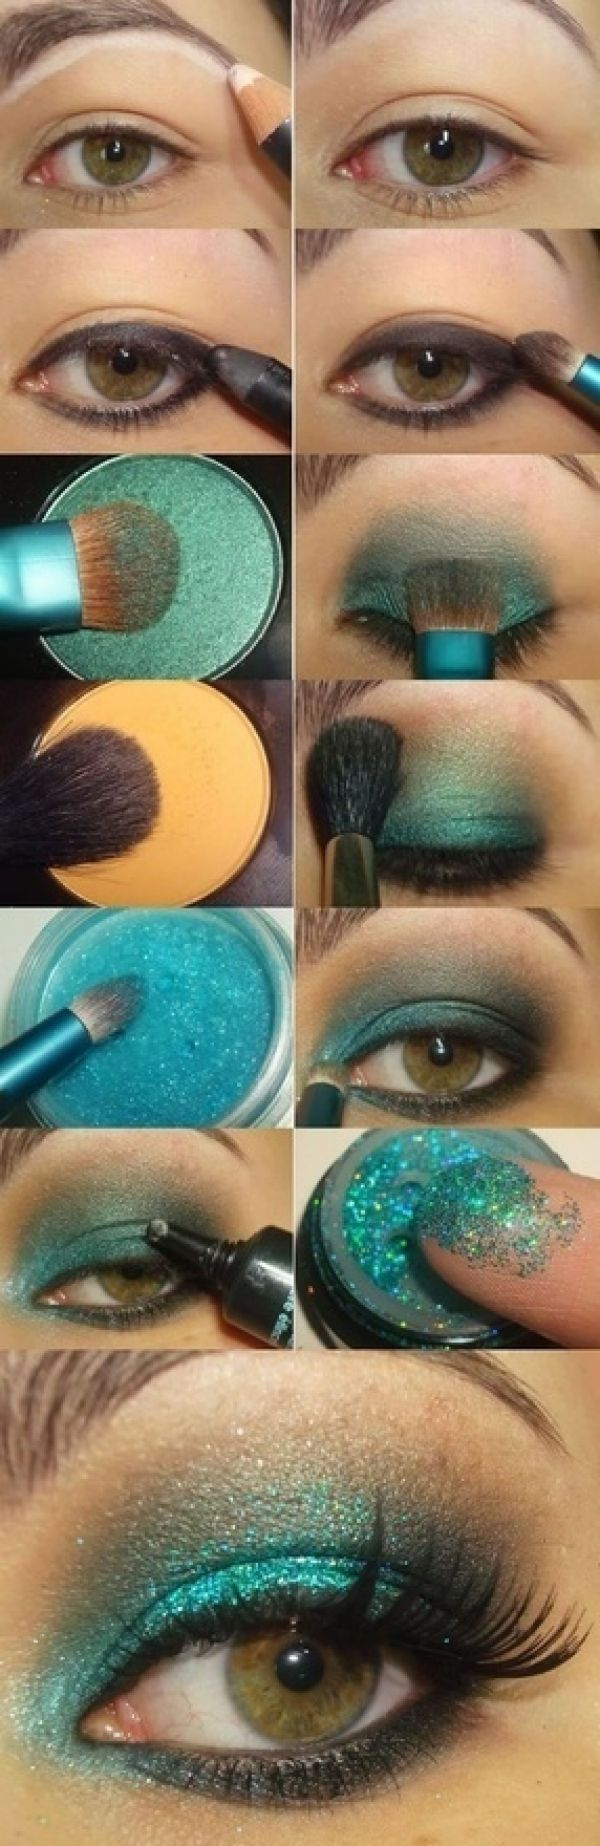 Makeup Ideas For Green Eyes 20 Gorgeous Makeup Ideas For Green Eyes Style Motivation